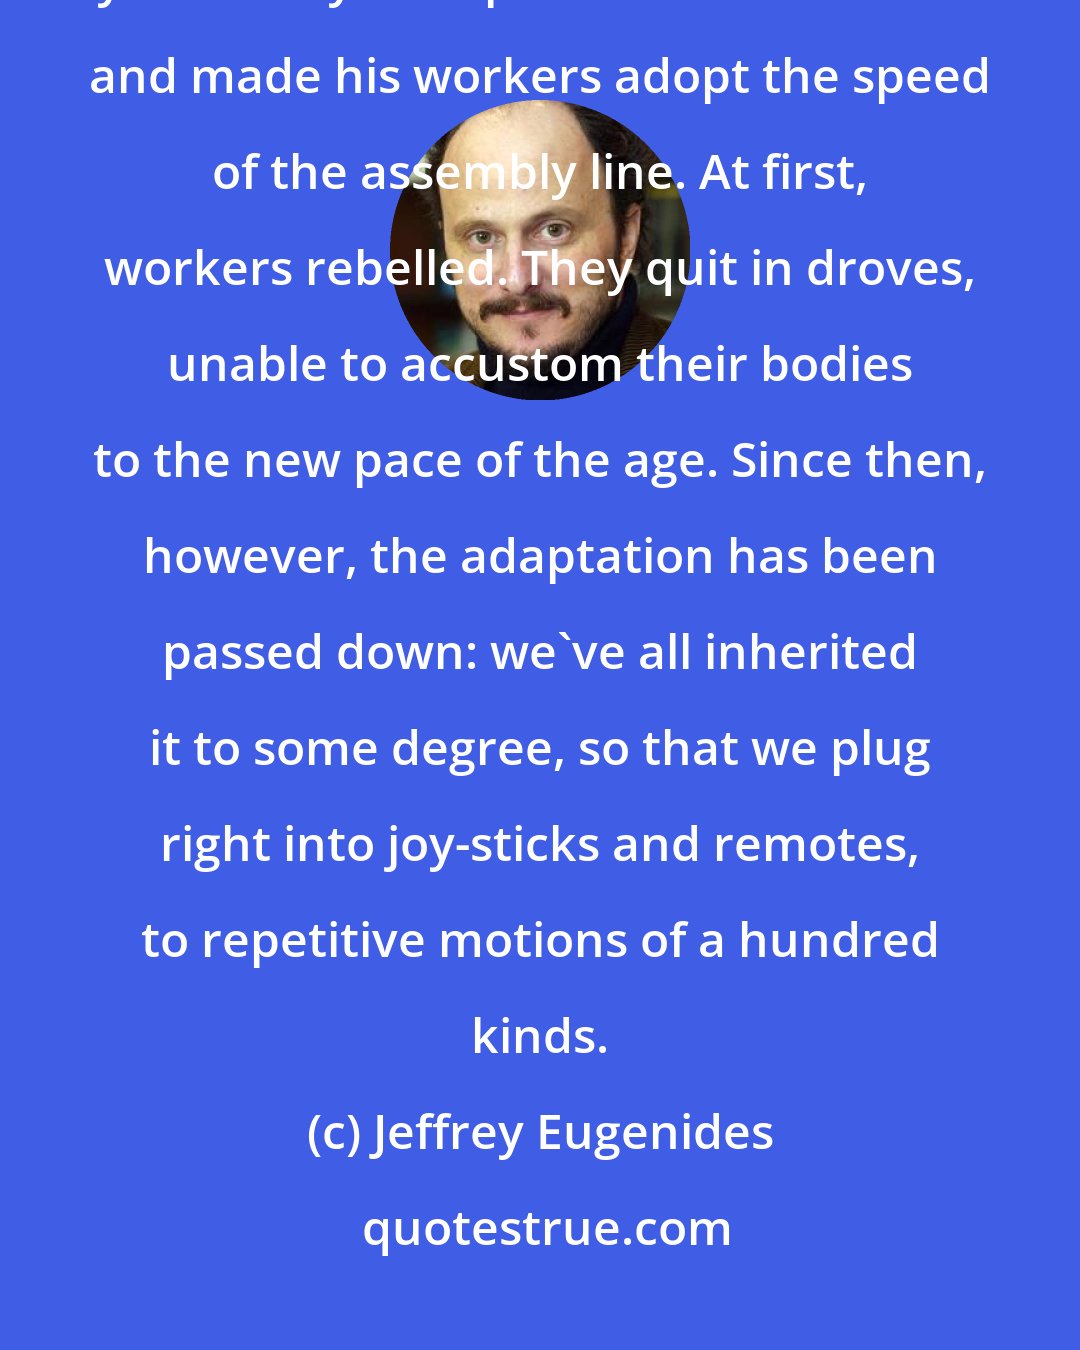 Jeffrey Eugenides: Historical fact: People stopped being people in 1913. That was the year Henry Ford put his cars on rollers and made his workers adopt the speed of the assembly line. At first, workers rebelled. They quit in droves, unable to accustom their bodies to the new pace of the age. Since then, however, the adaptation has been passed down: we've all inherited it to some degree, so that we plug right into joy-sticks and remotes, to repetitive motions of a hundred kinds.